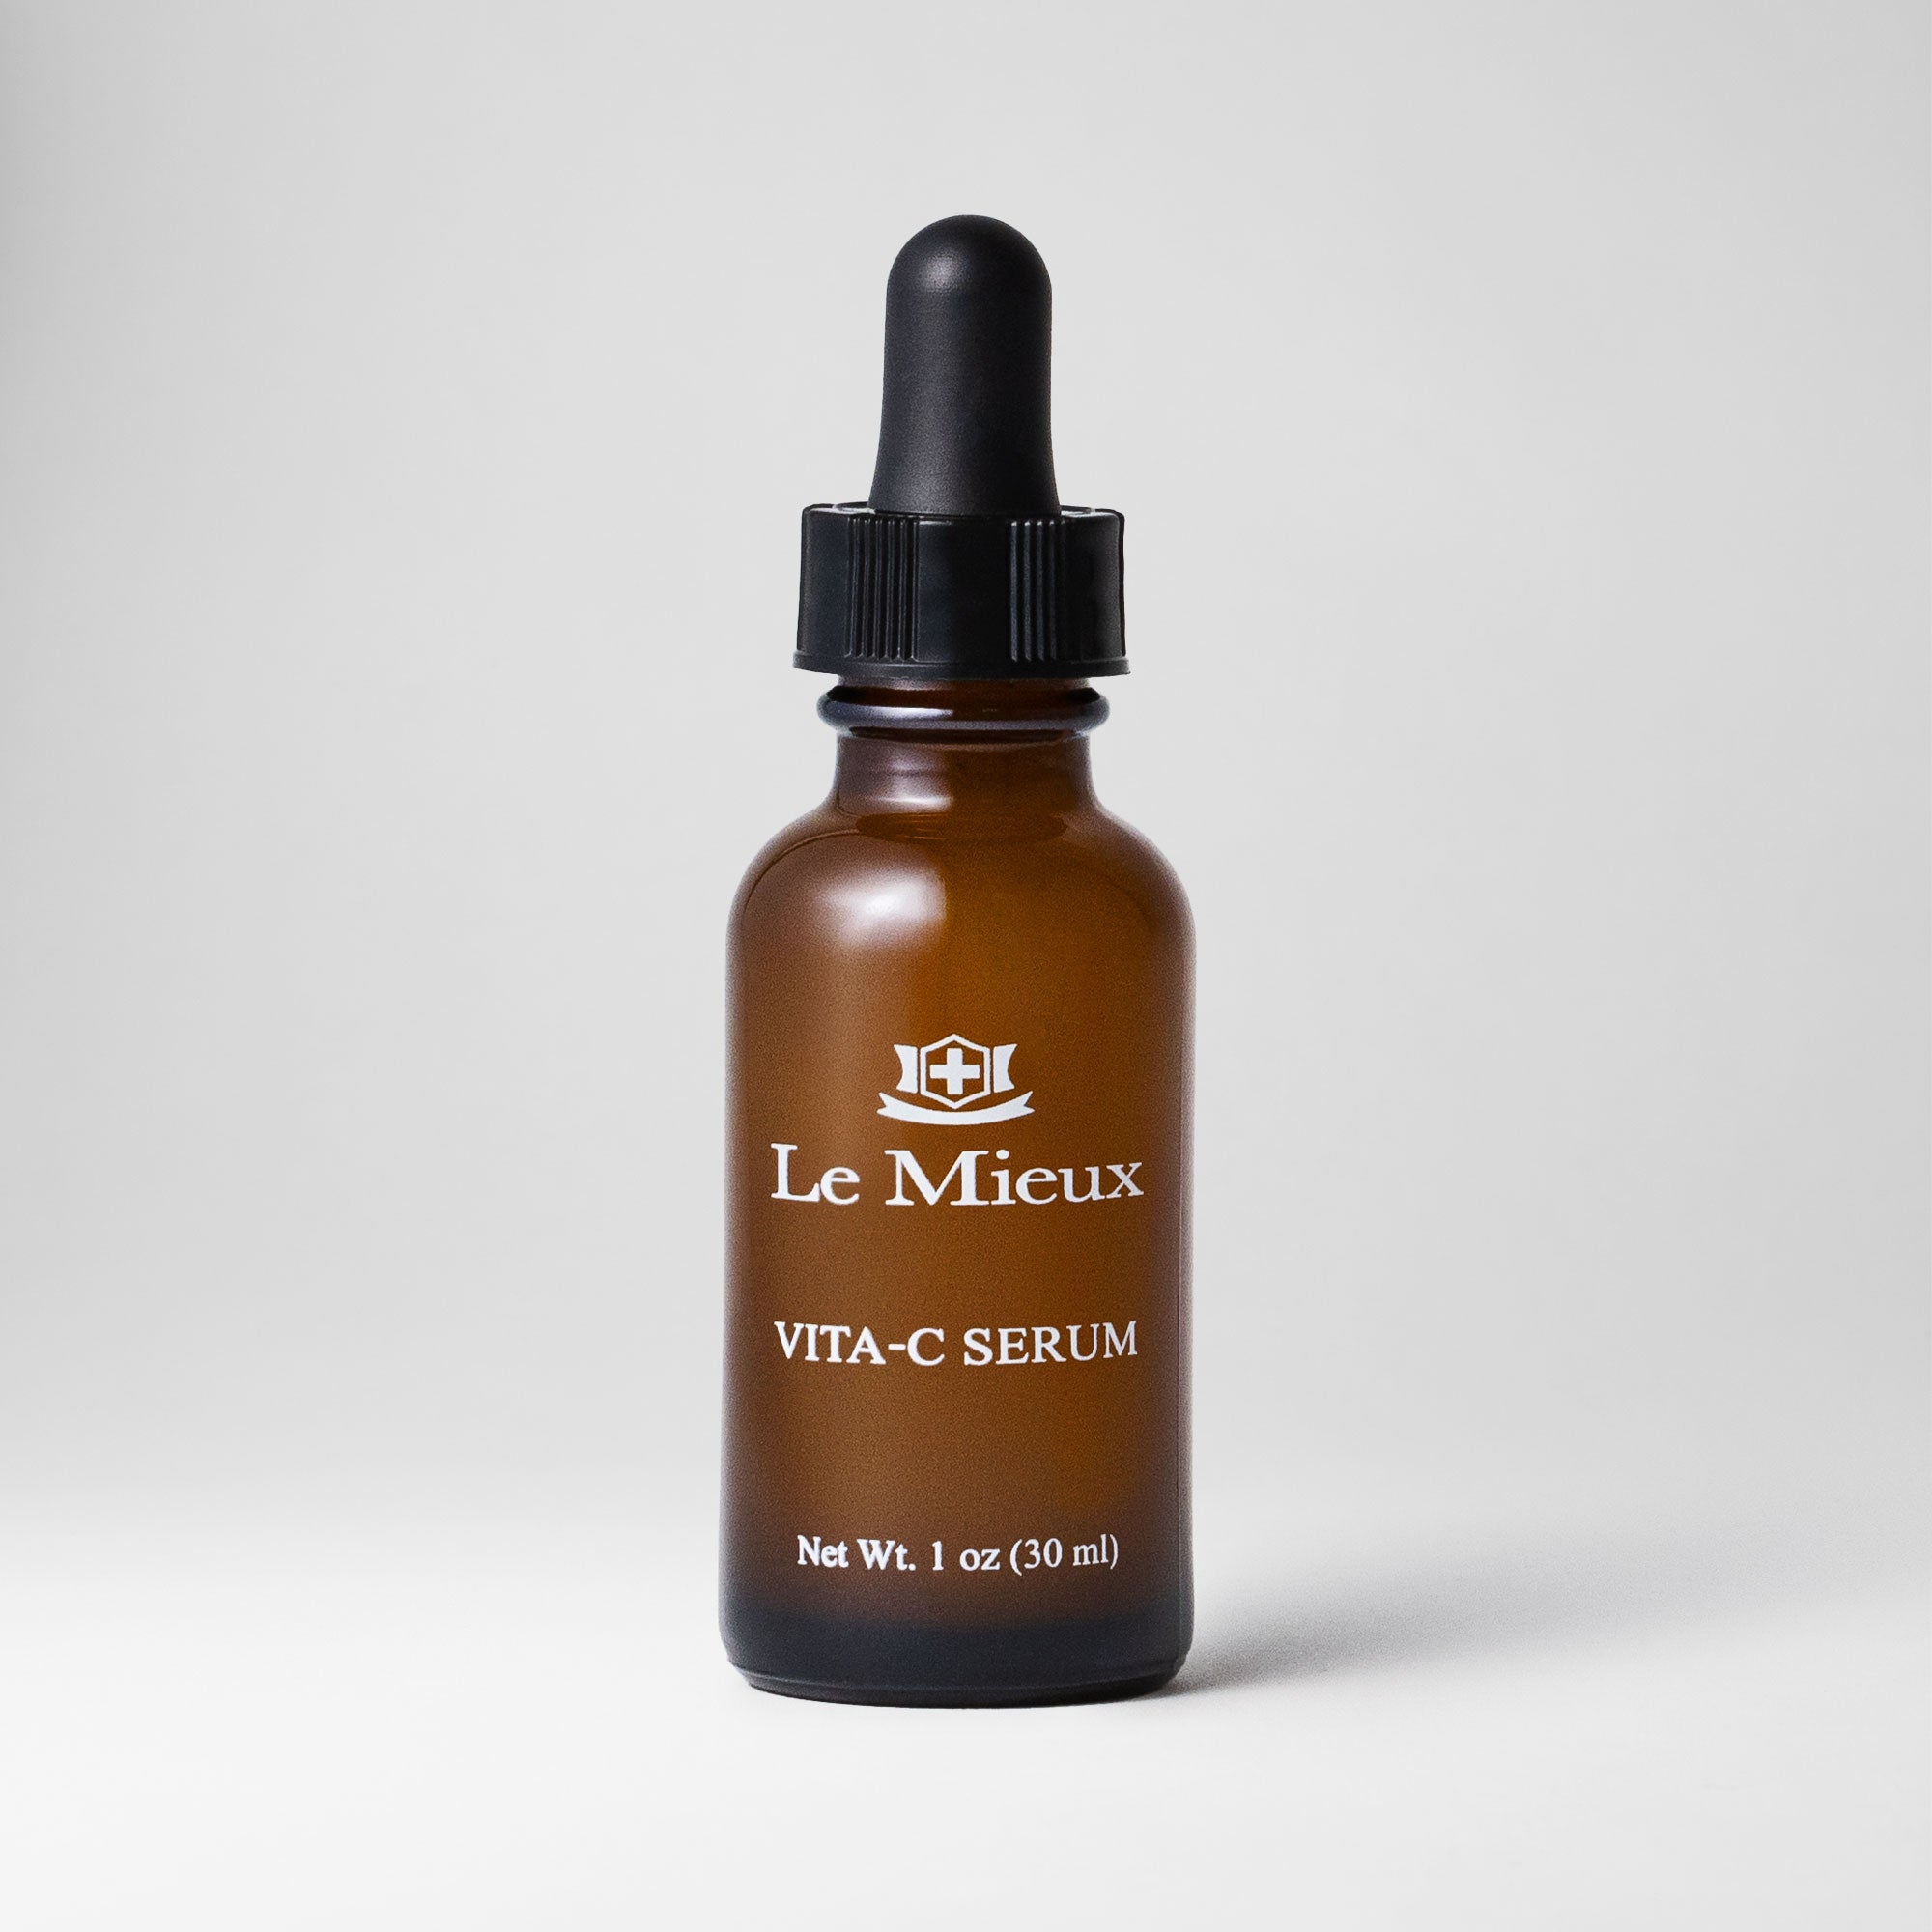  VITA-C SERUM from Le Mieux Skincare - featured